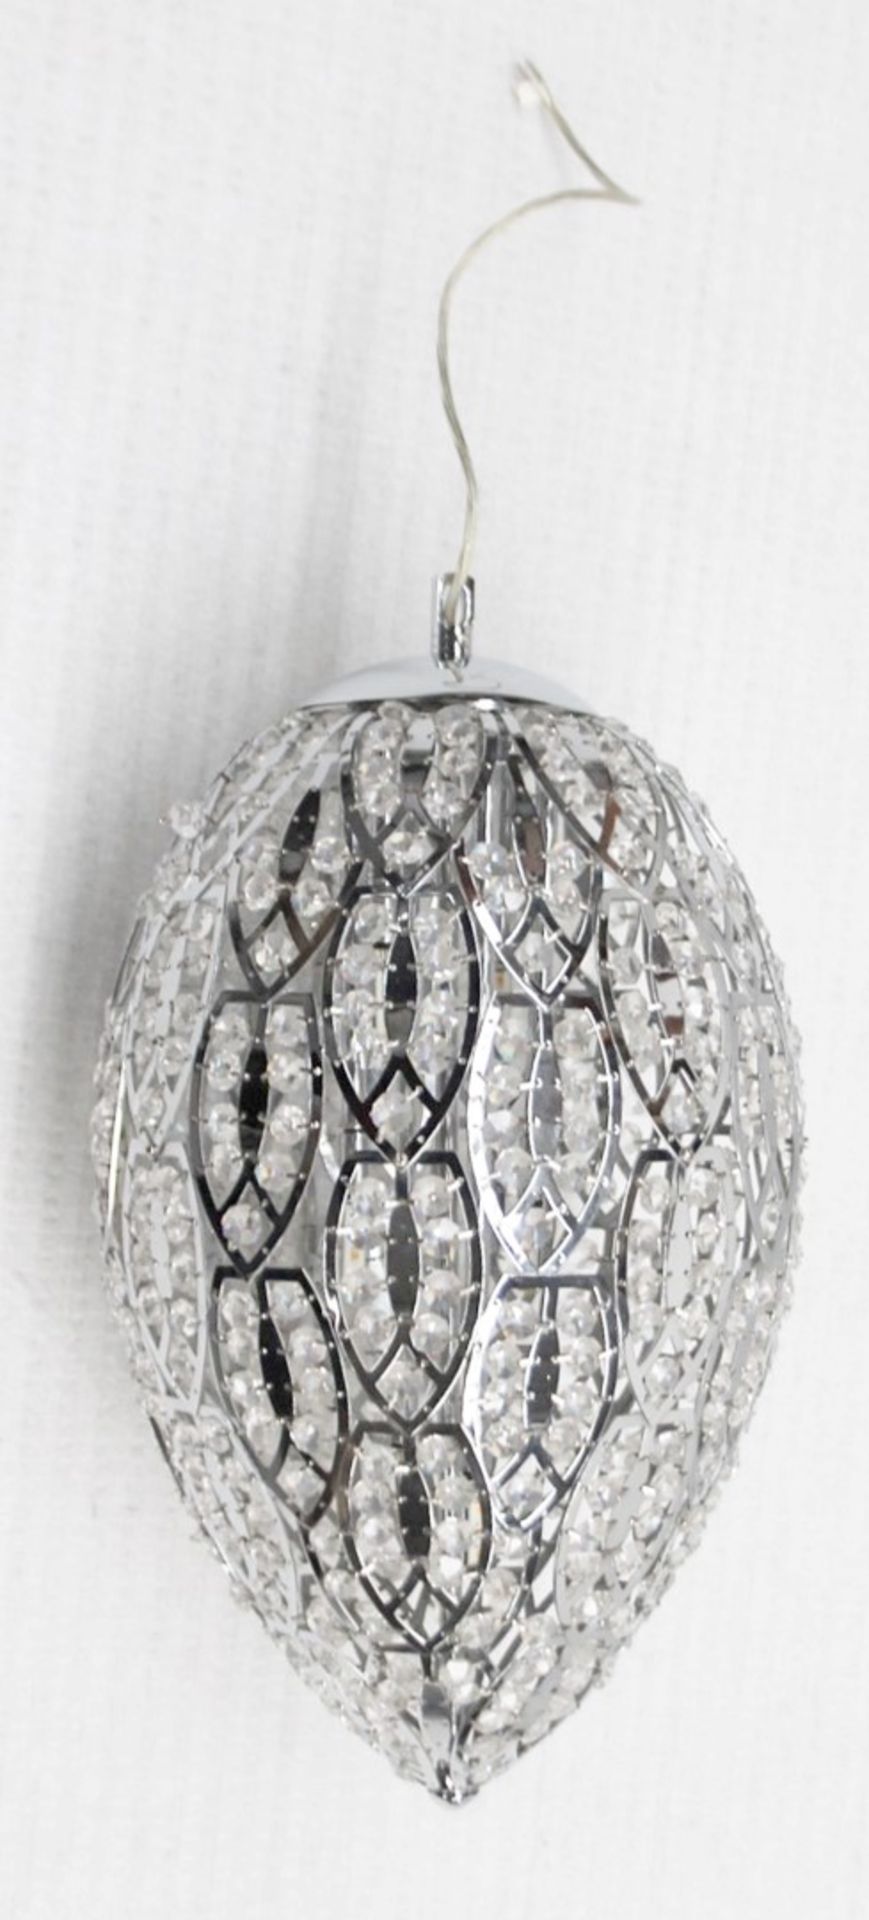 1 x High-end Italian LED Egg-Shaped Light Fitting Encrusted In Premium ASFOUR Crystal - RRP £4,000 - Image 2 of 9